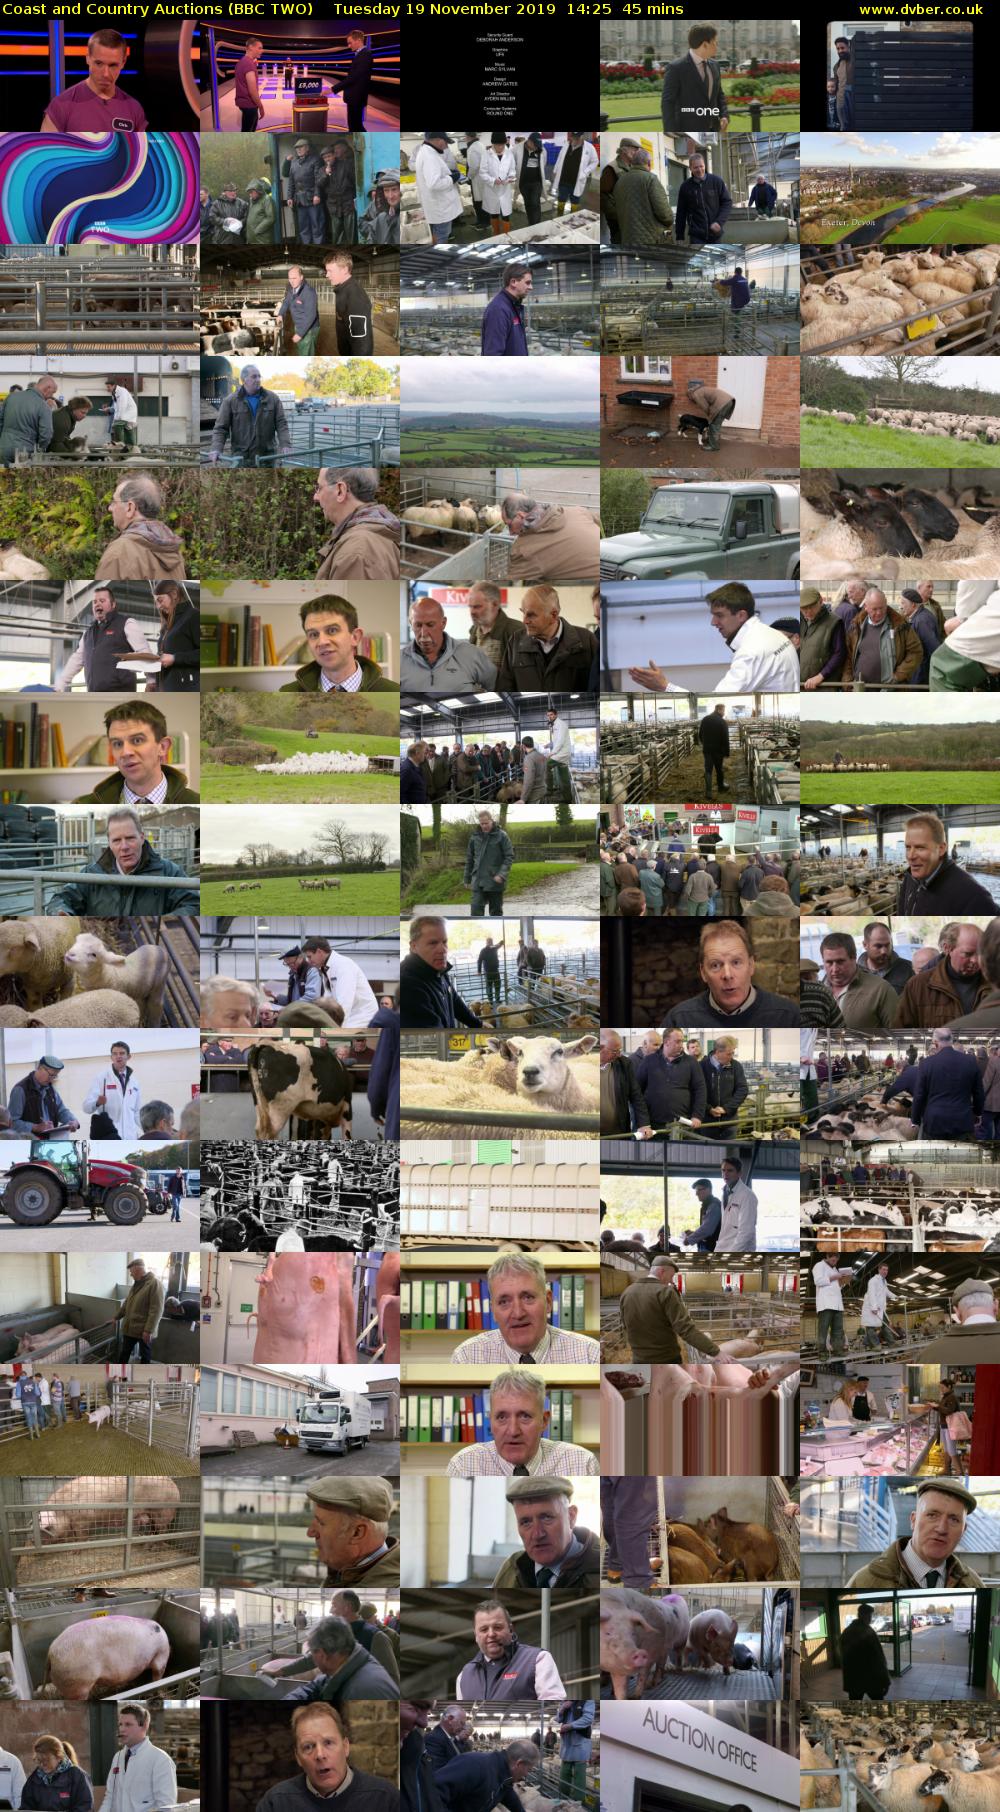 Coast and Country Auctions (BBC TWO) Tuesday 19 November 2019 14:25 - 15:10